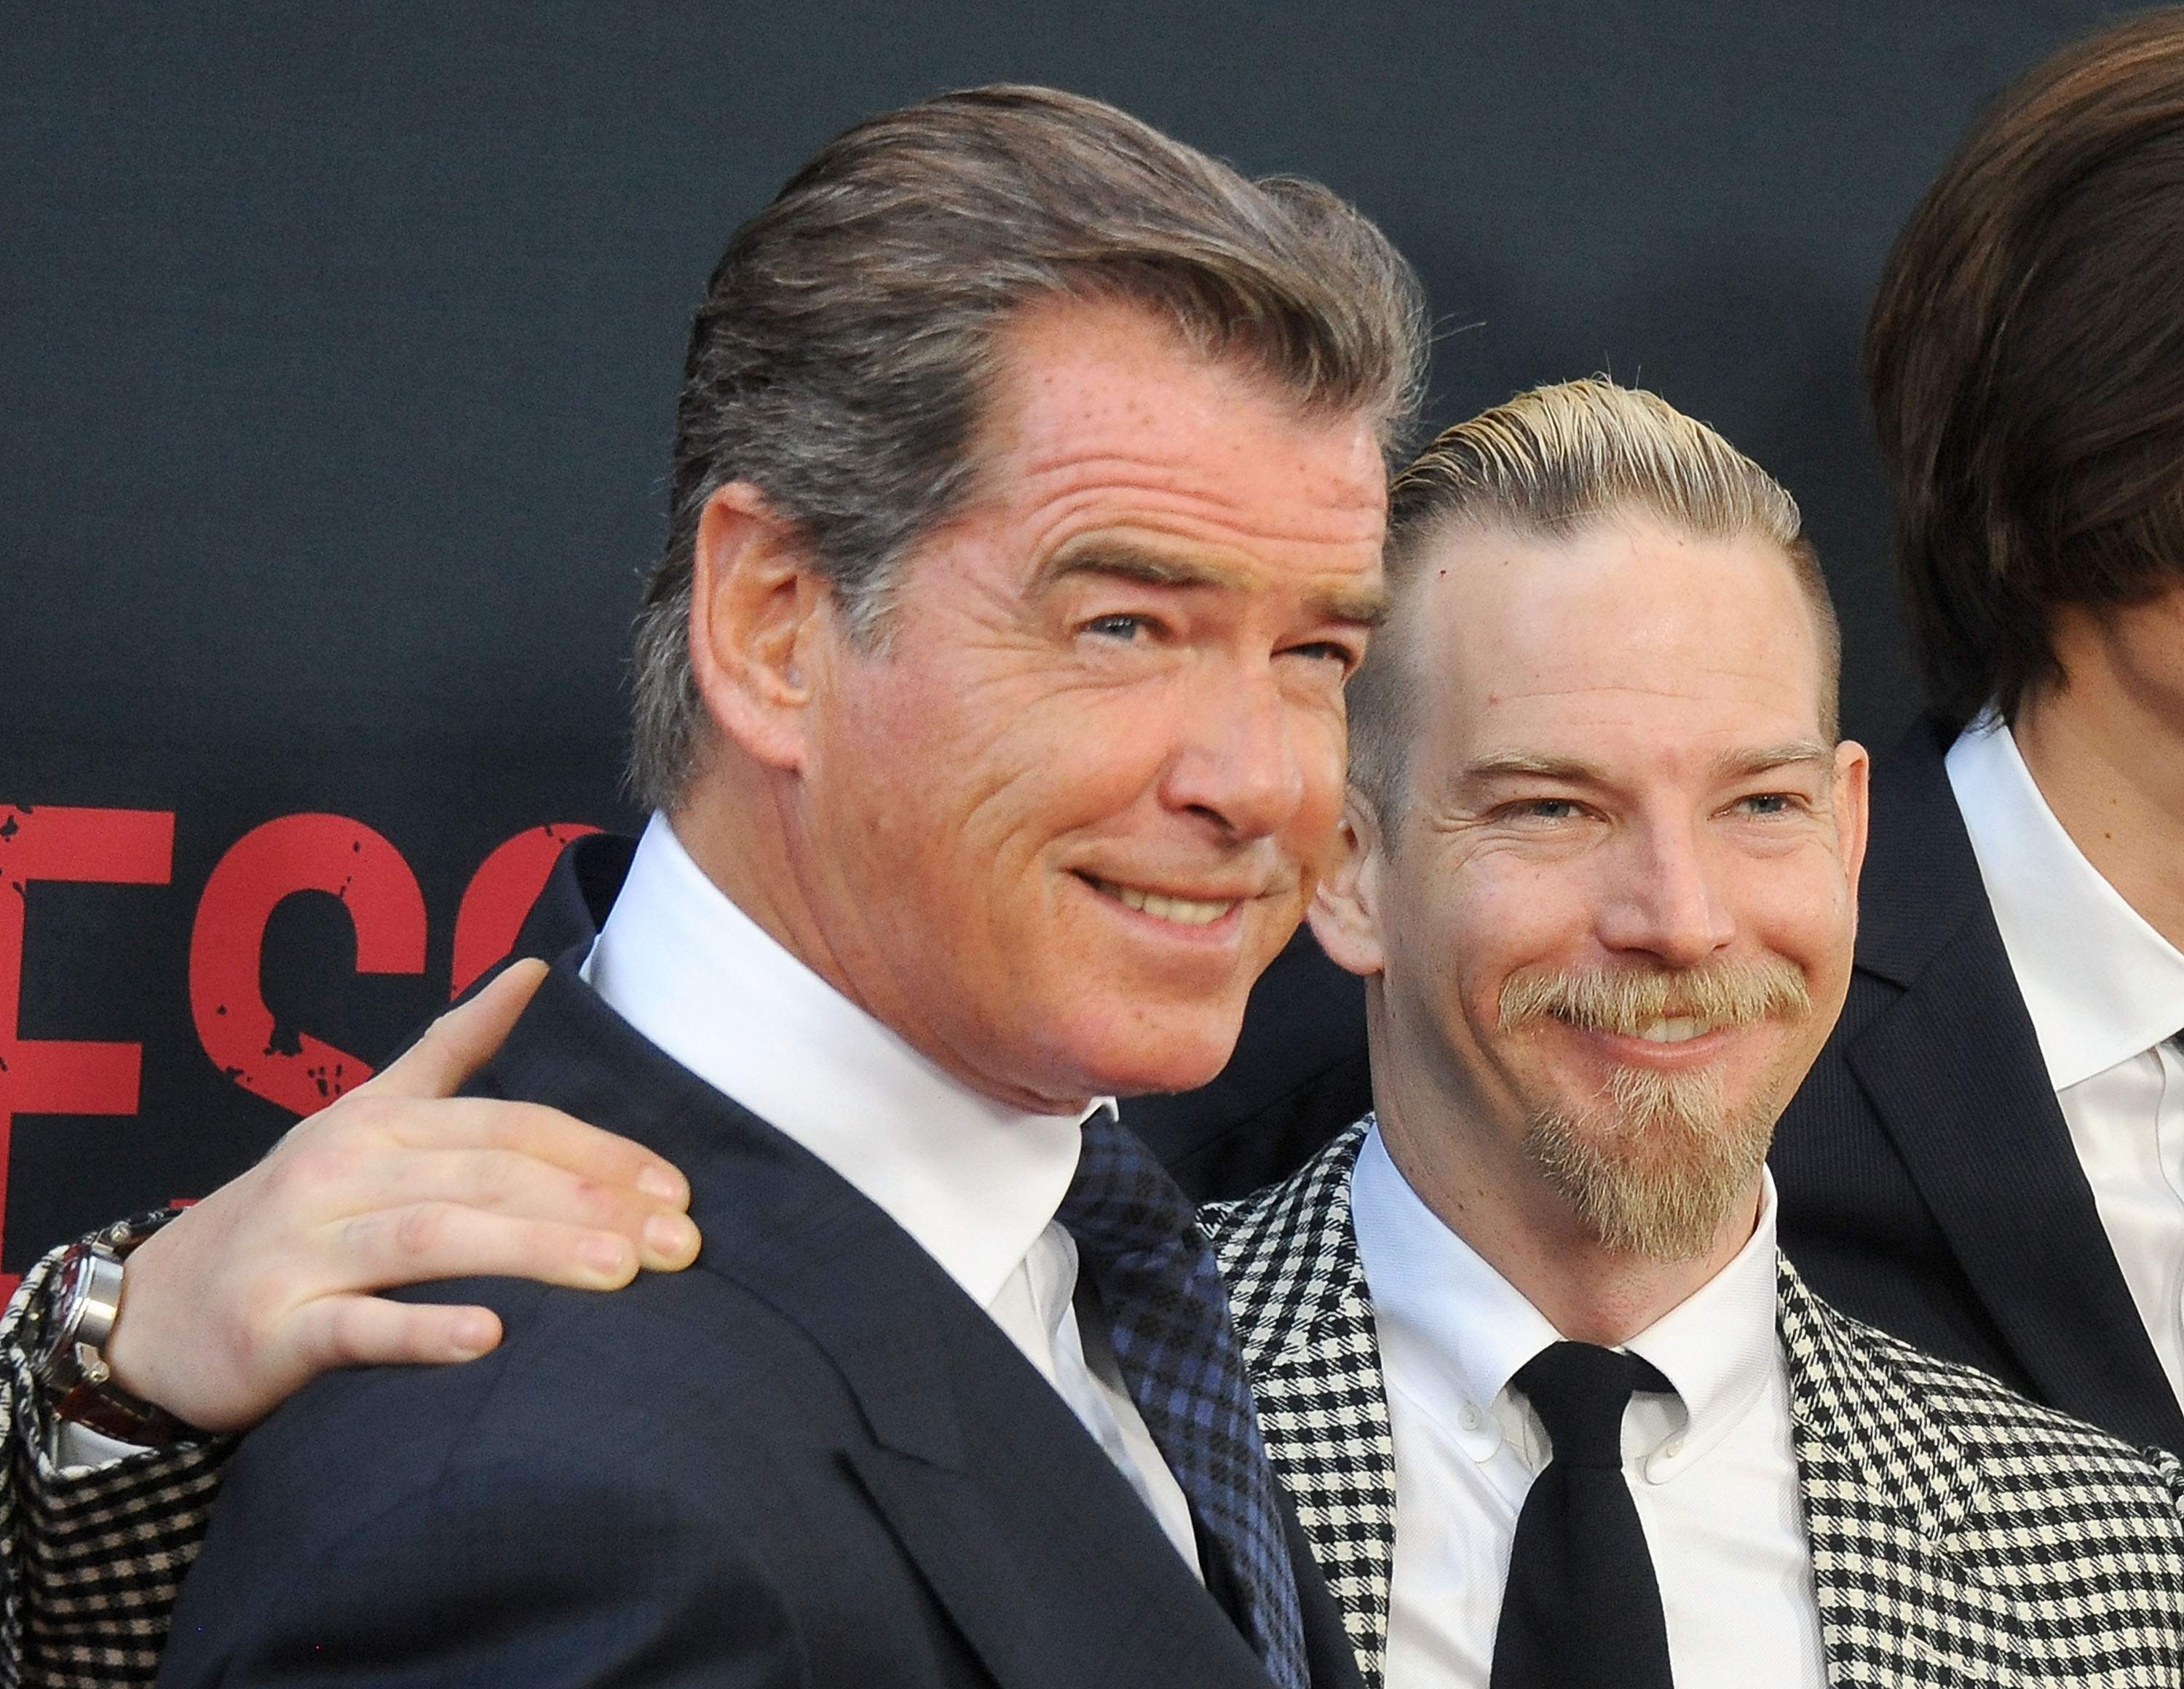 Pierce Brosnan with his son Sean Brosnan at the premiere of "No Escape" in Los Angeles in 2015  | Source: Getty Images